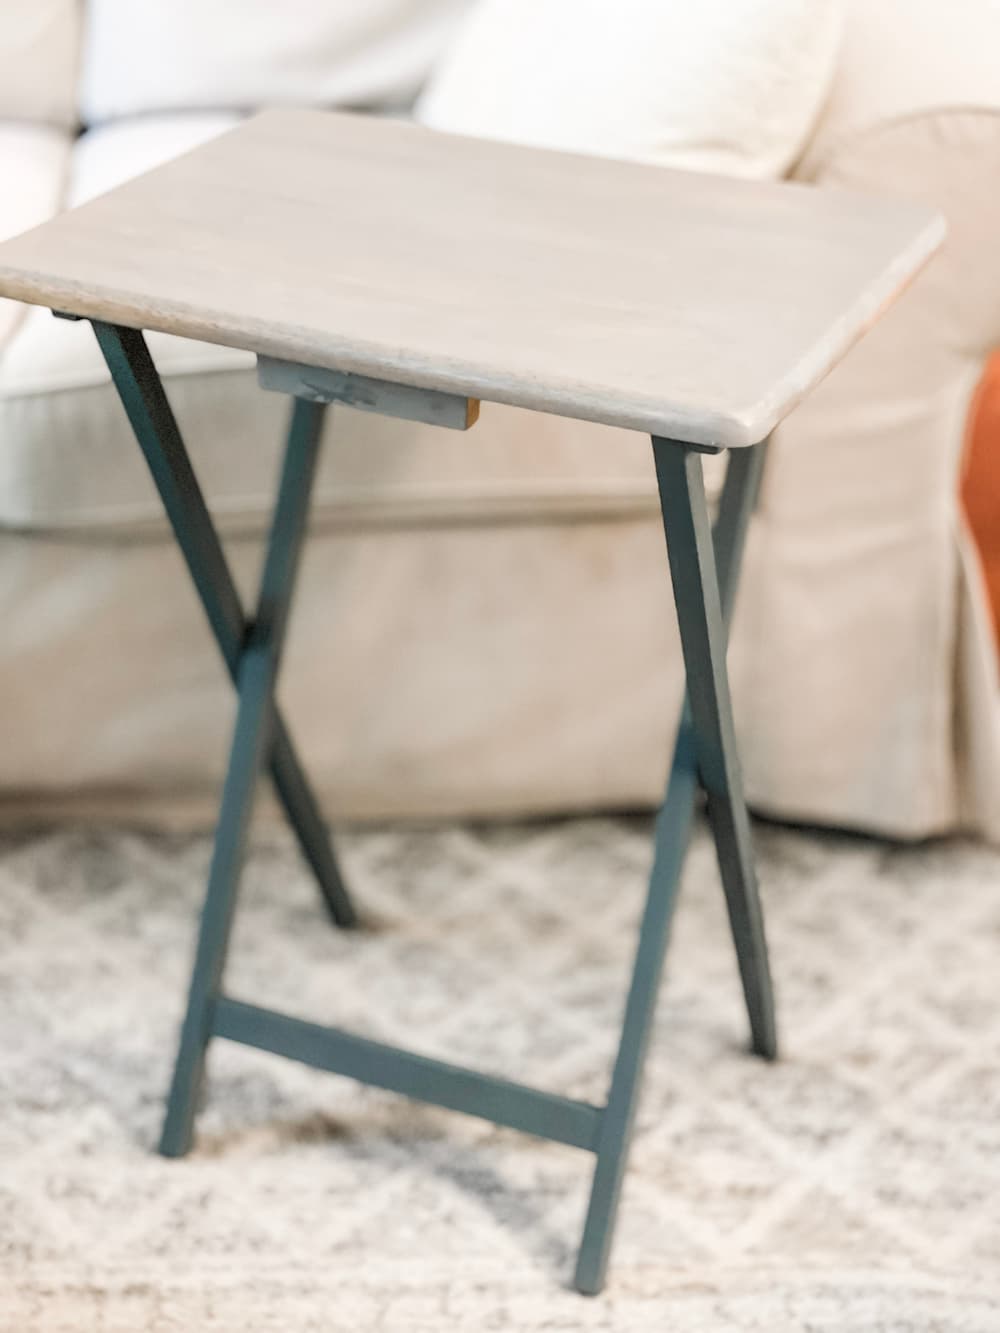 AN UPDATED WOODEN TV TRAY TABLE IN FRONT OF A SOFA PAINTED GREY